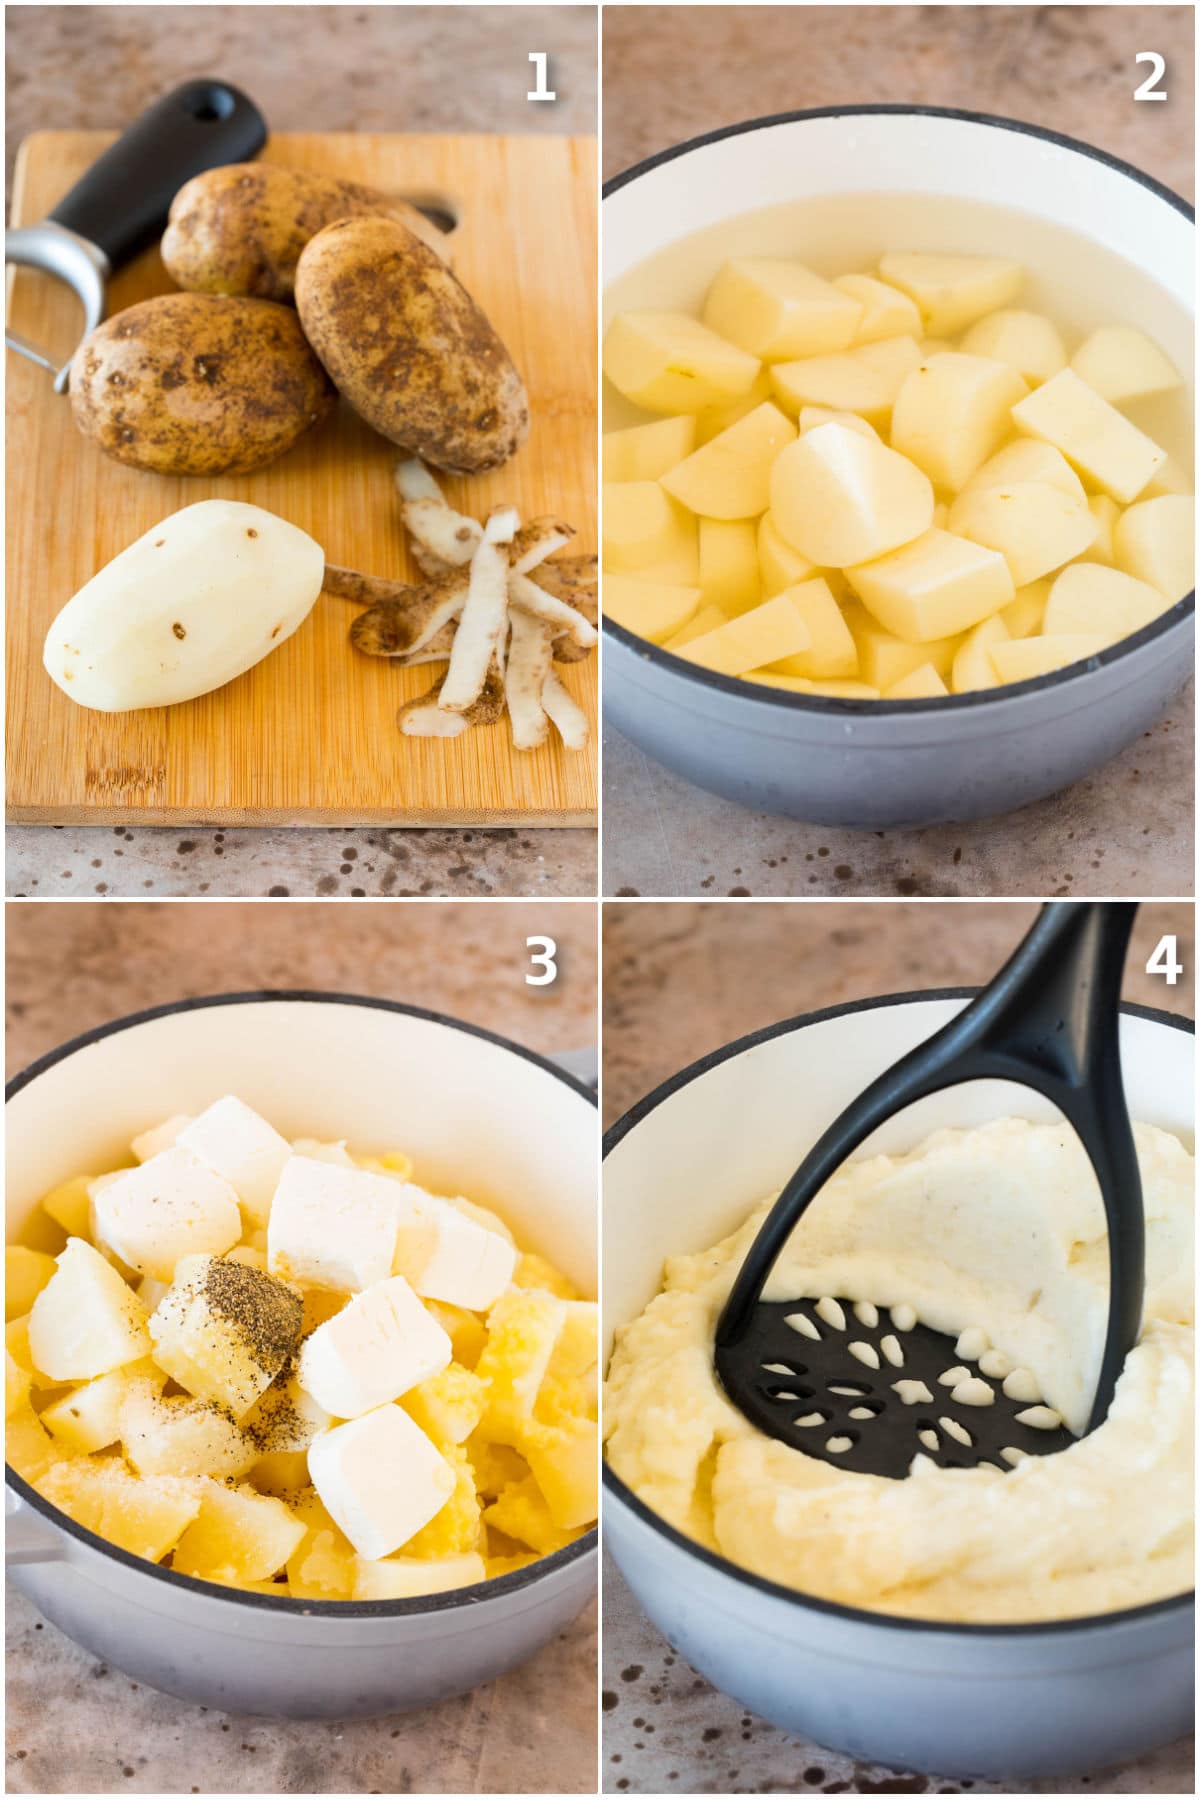 Step by step shots on how to peel, boil and crush potatoes.